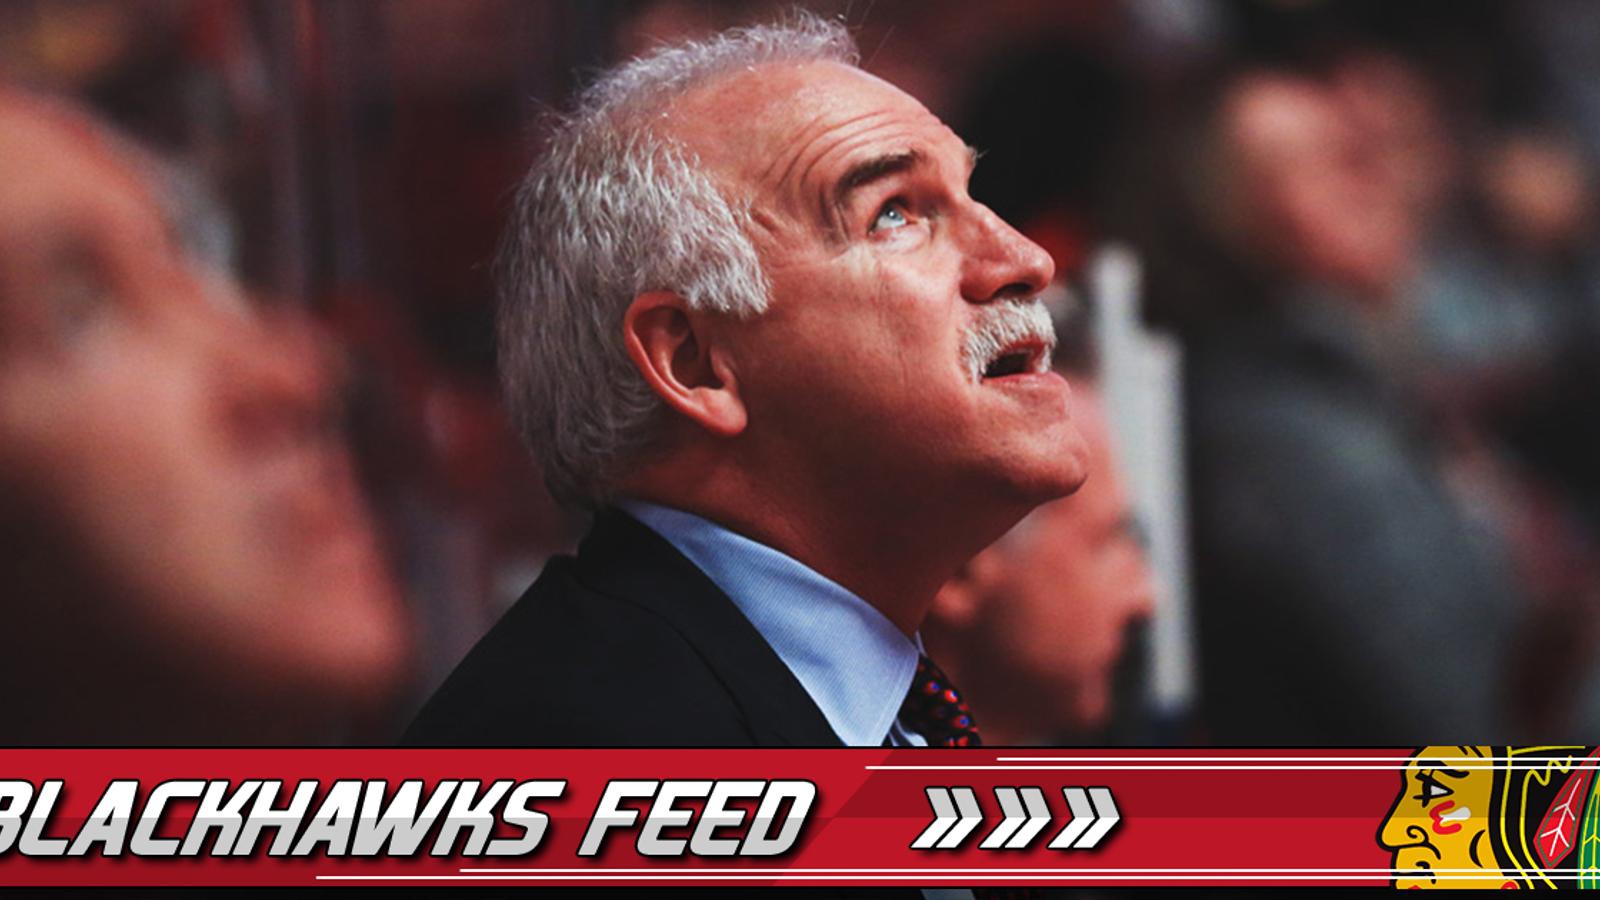 Blackhawks GM comments on the WARNING shot he directed at Joel Quenneville.